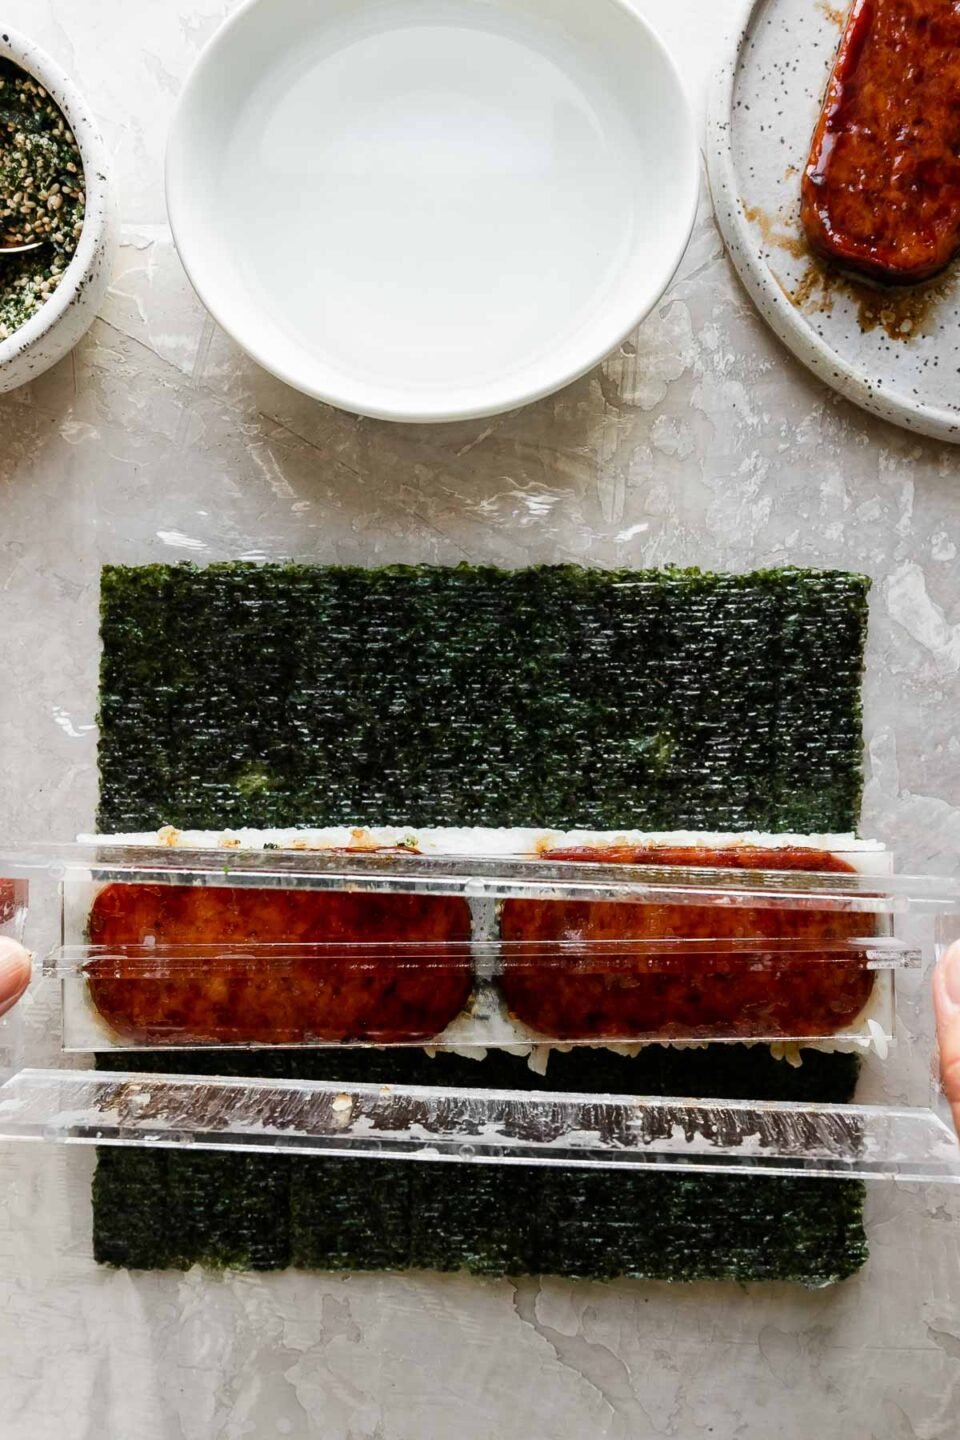 A close up of a woman using her hands to remove the lid of a spam musubi filled musubi mold to create a finished spam musubi. Resting above the musubi mold is a small bowl filled with furikake seasoning with a spoon resting inside, another small white bowl filled with water, and a small speckled ceramic plate with pan-fried teriyaki Spam.